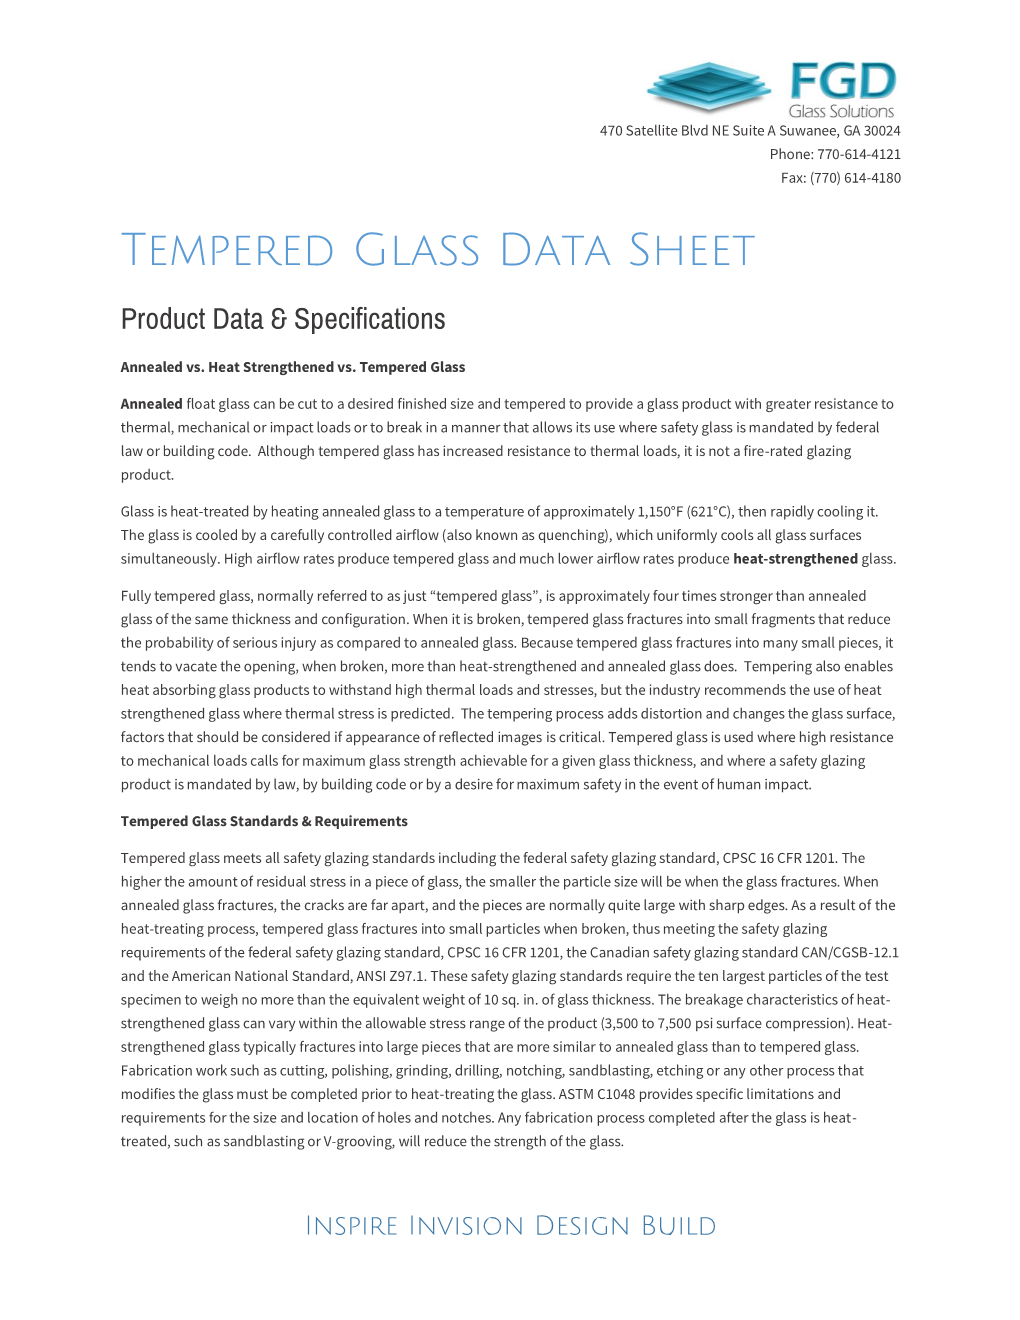 Tempered Glass Data Sheet Product Data & Specifications